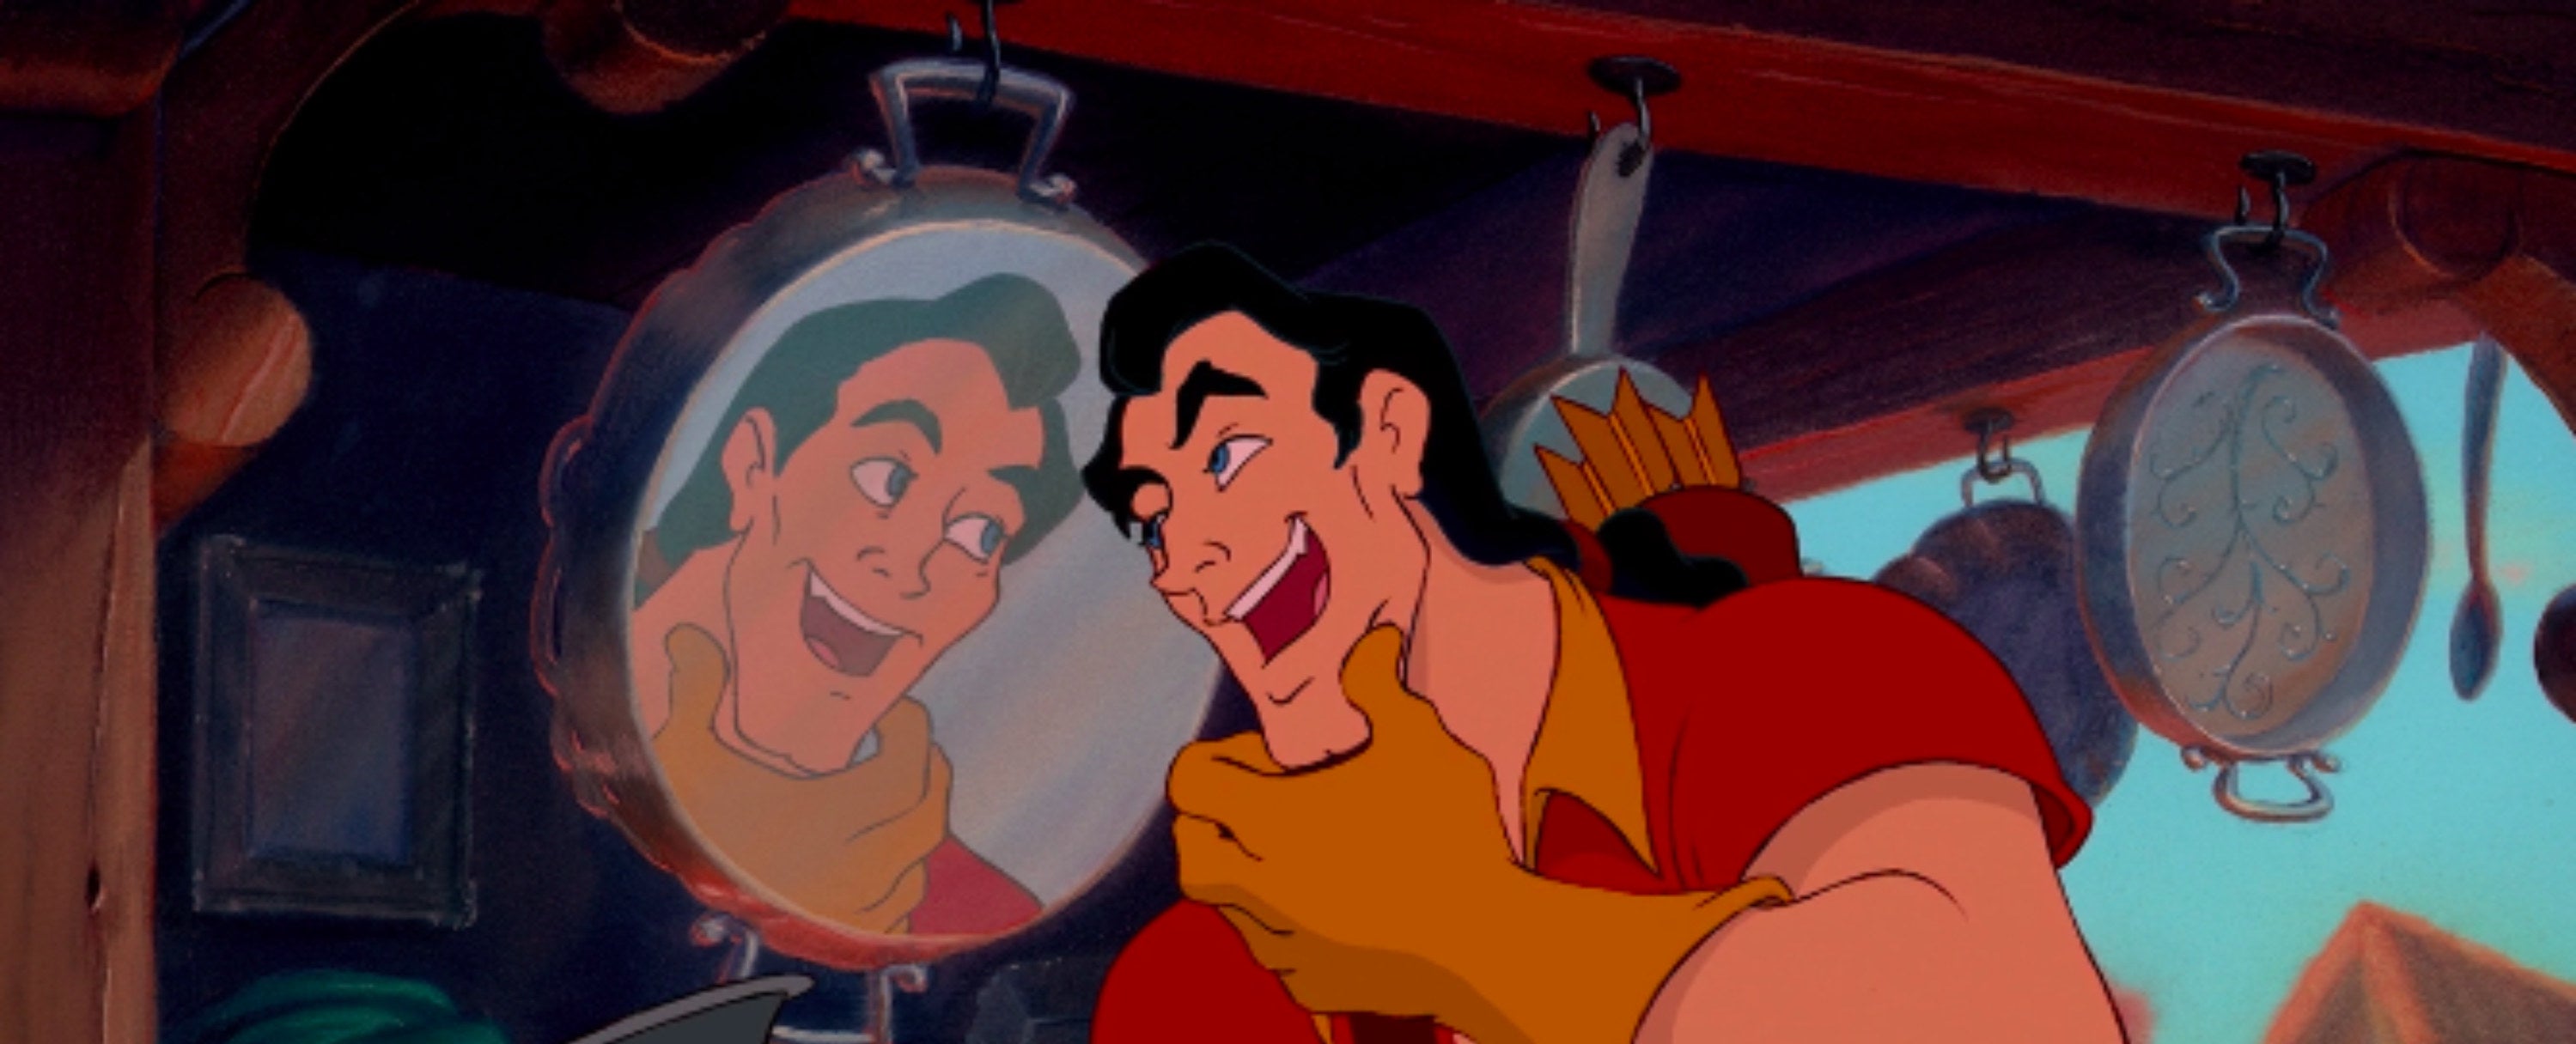 Gaston singing about how he wants to &quot;woo and marry Belle&quot;